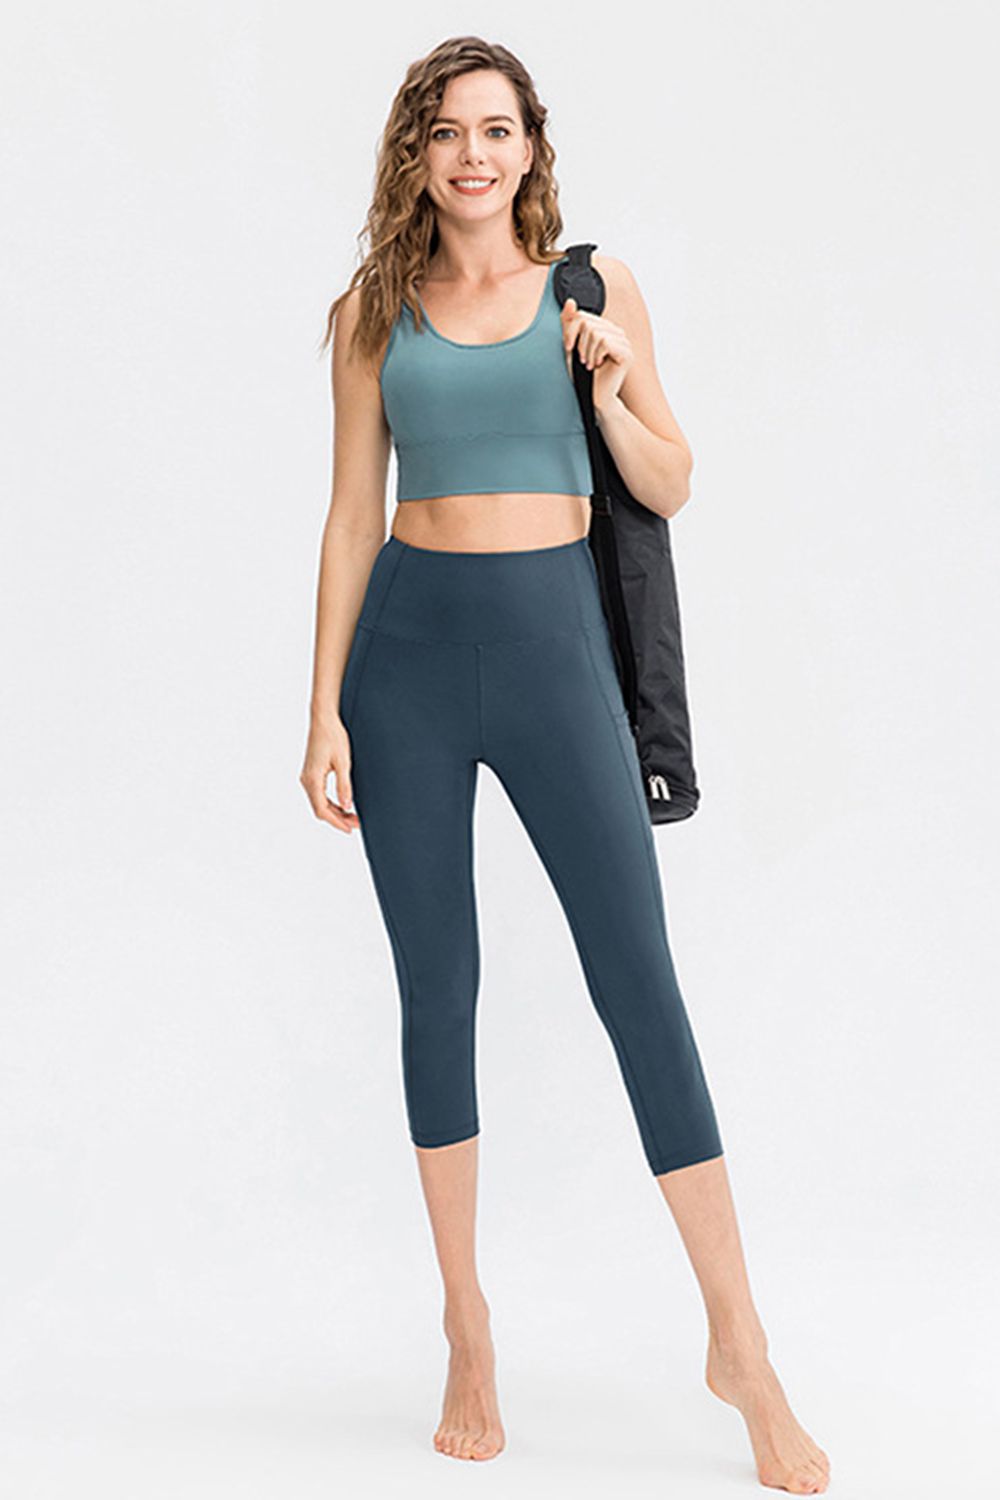 Wide Waistband Cropped Active Leggings with Pockets Print on any thing USA/STOD clothes